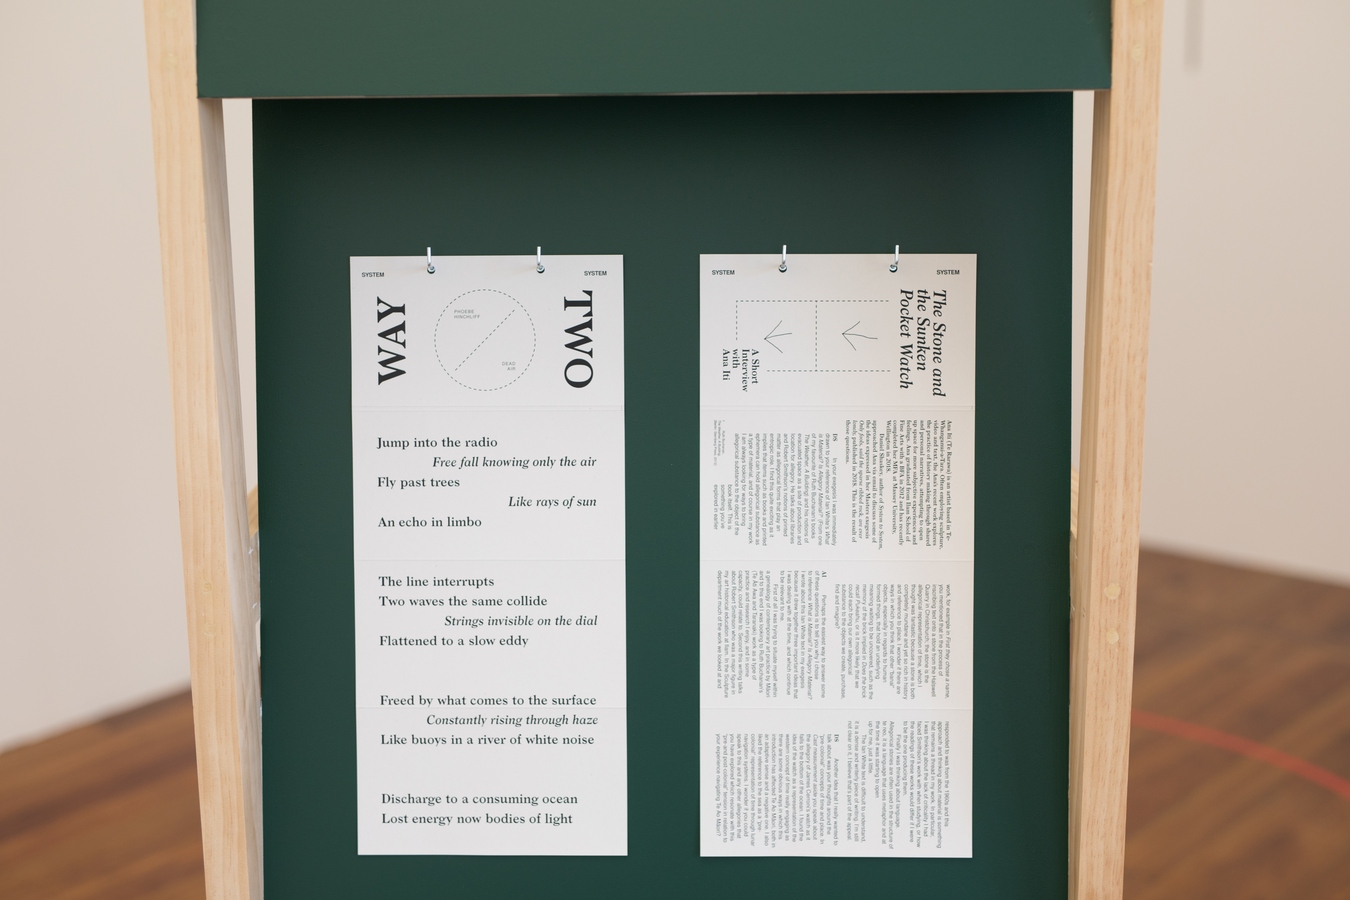 Image: Daniel Shaskey, System to System Chapters 3 and 4 (installation view), 2019-2020. Digitally printed take home publication and timber kiosk. Photo: Janneth Gil.